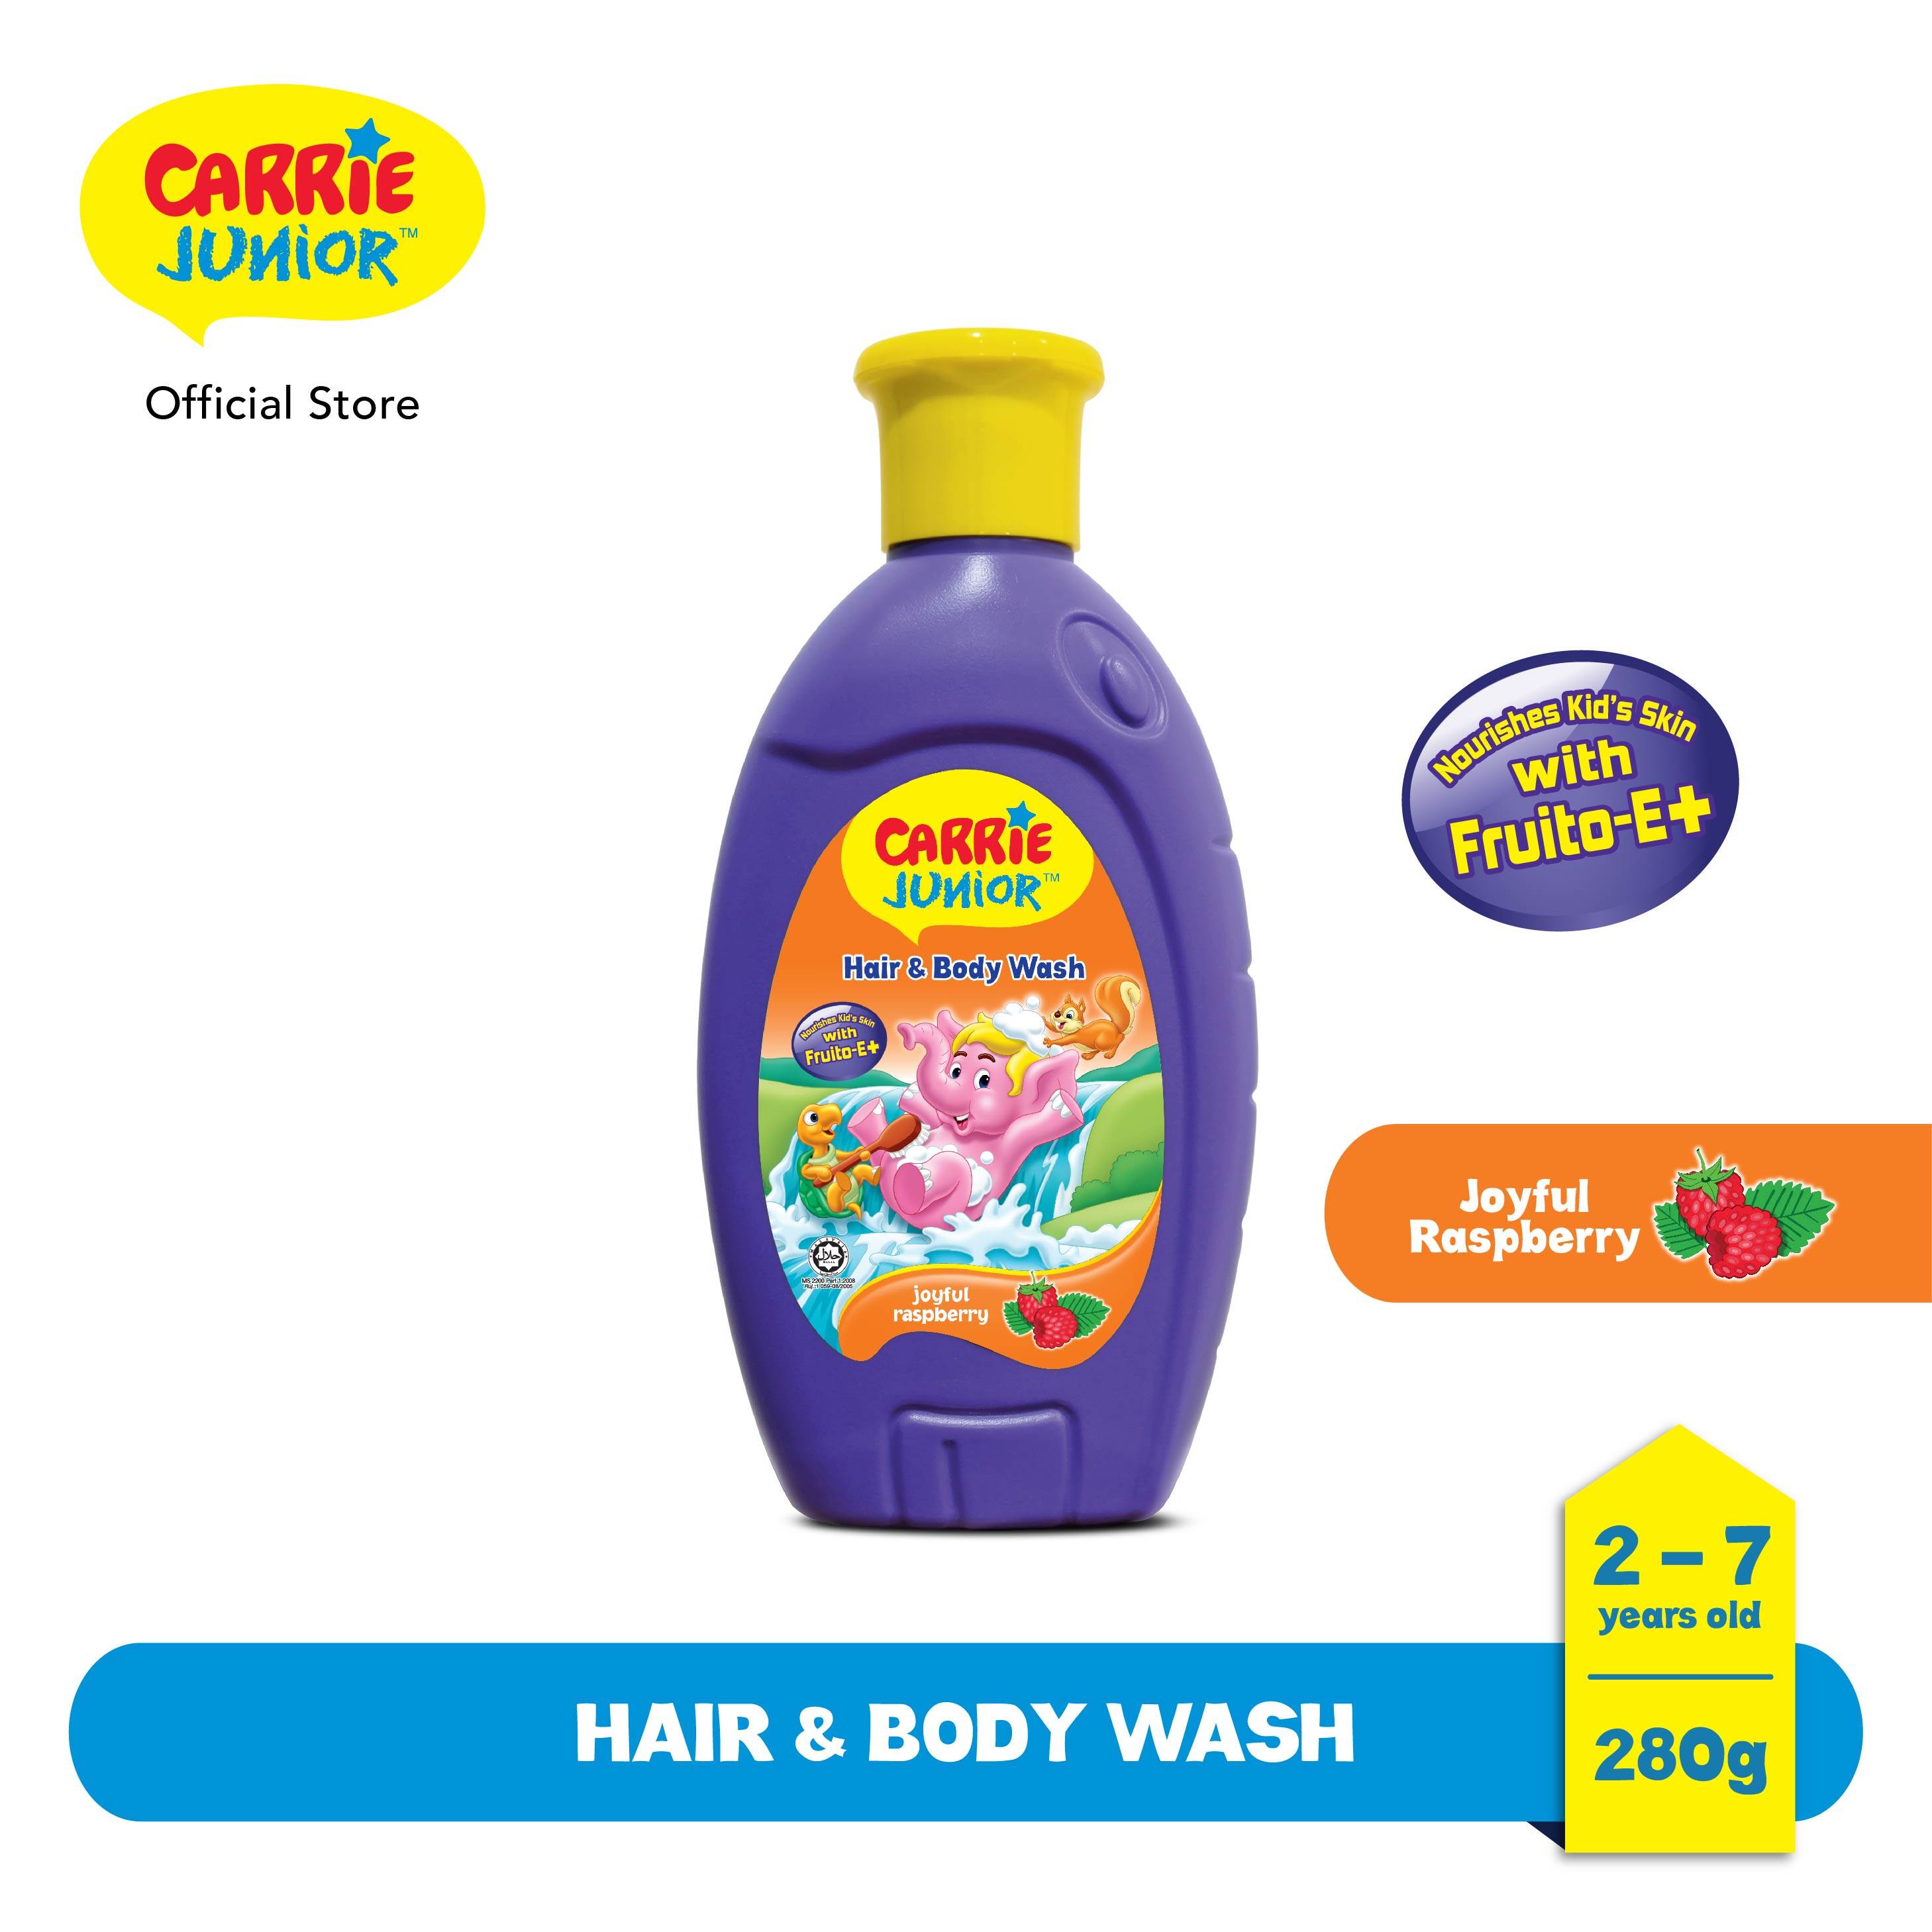 Carrie junior hair and body wash